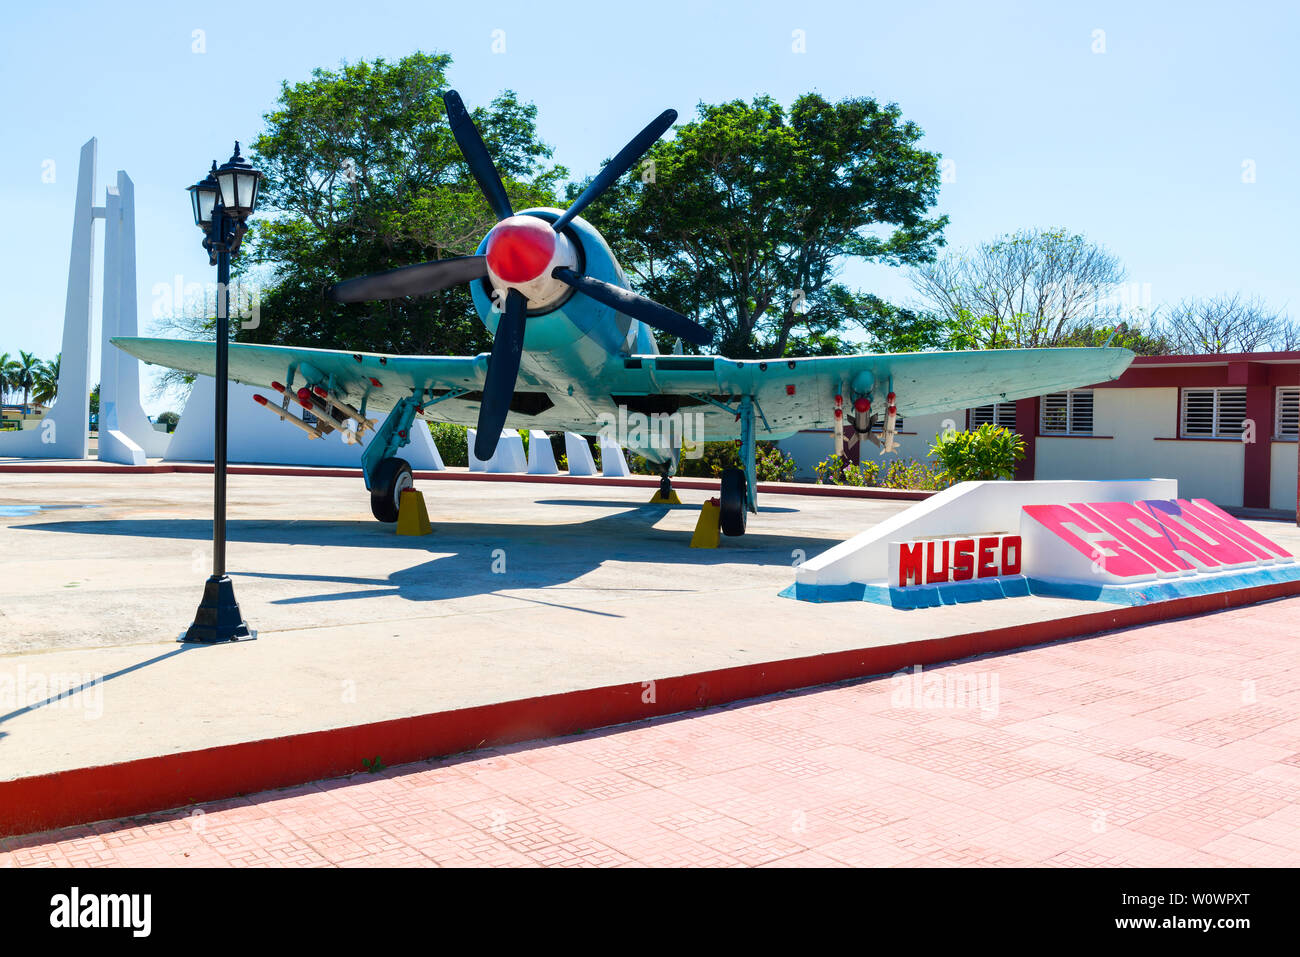 Hawker Sea Fury (British fighter aircraft)  parked at the entrance to the Museo de Playa Giron or Bay of Pigs Museum, Playa Giron, Cuba Stock Photo